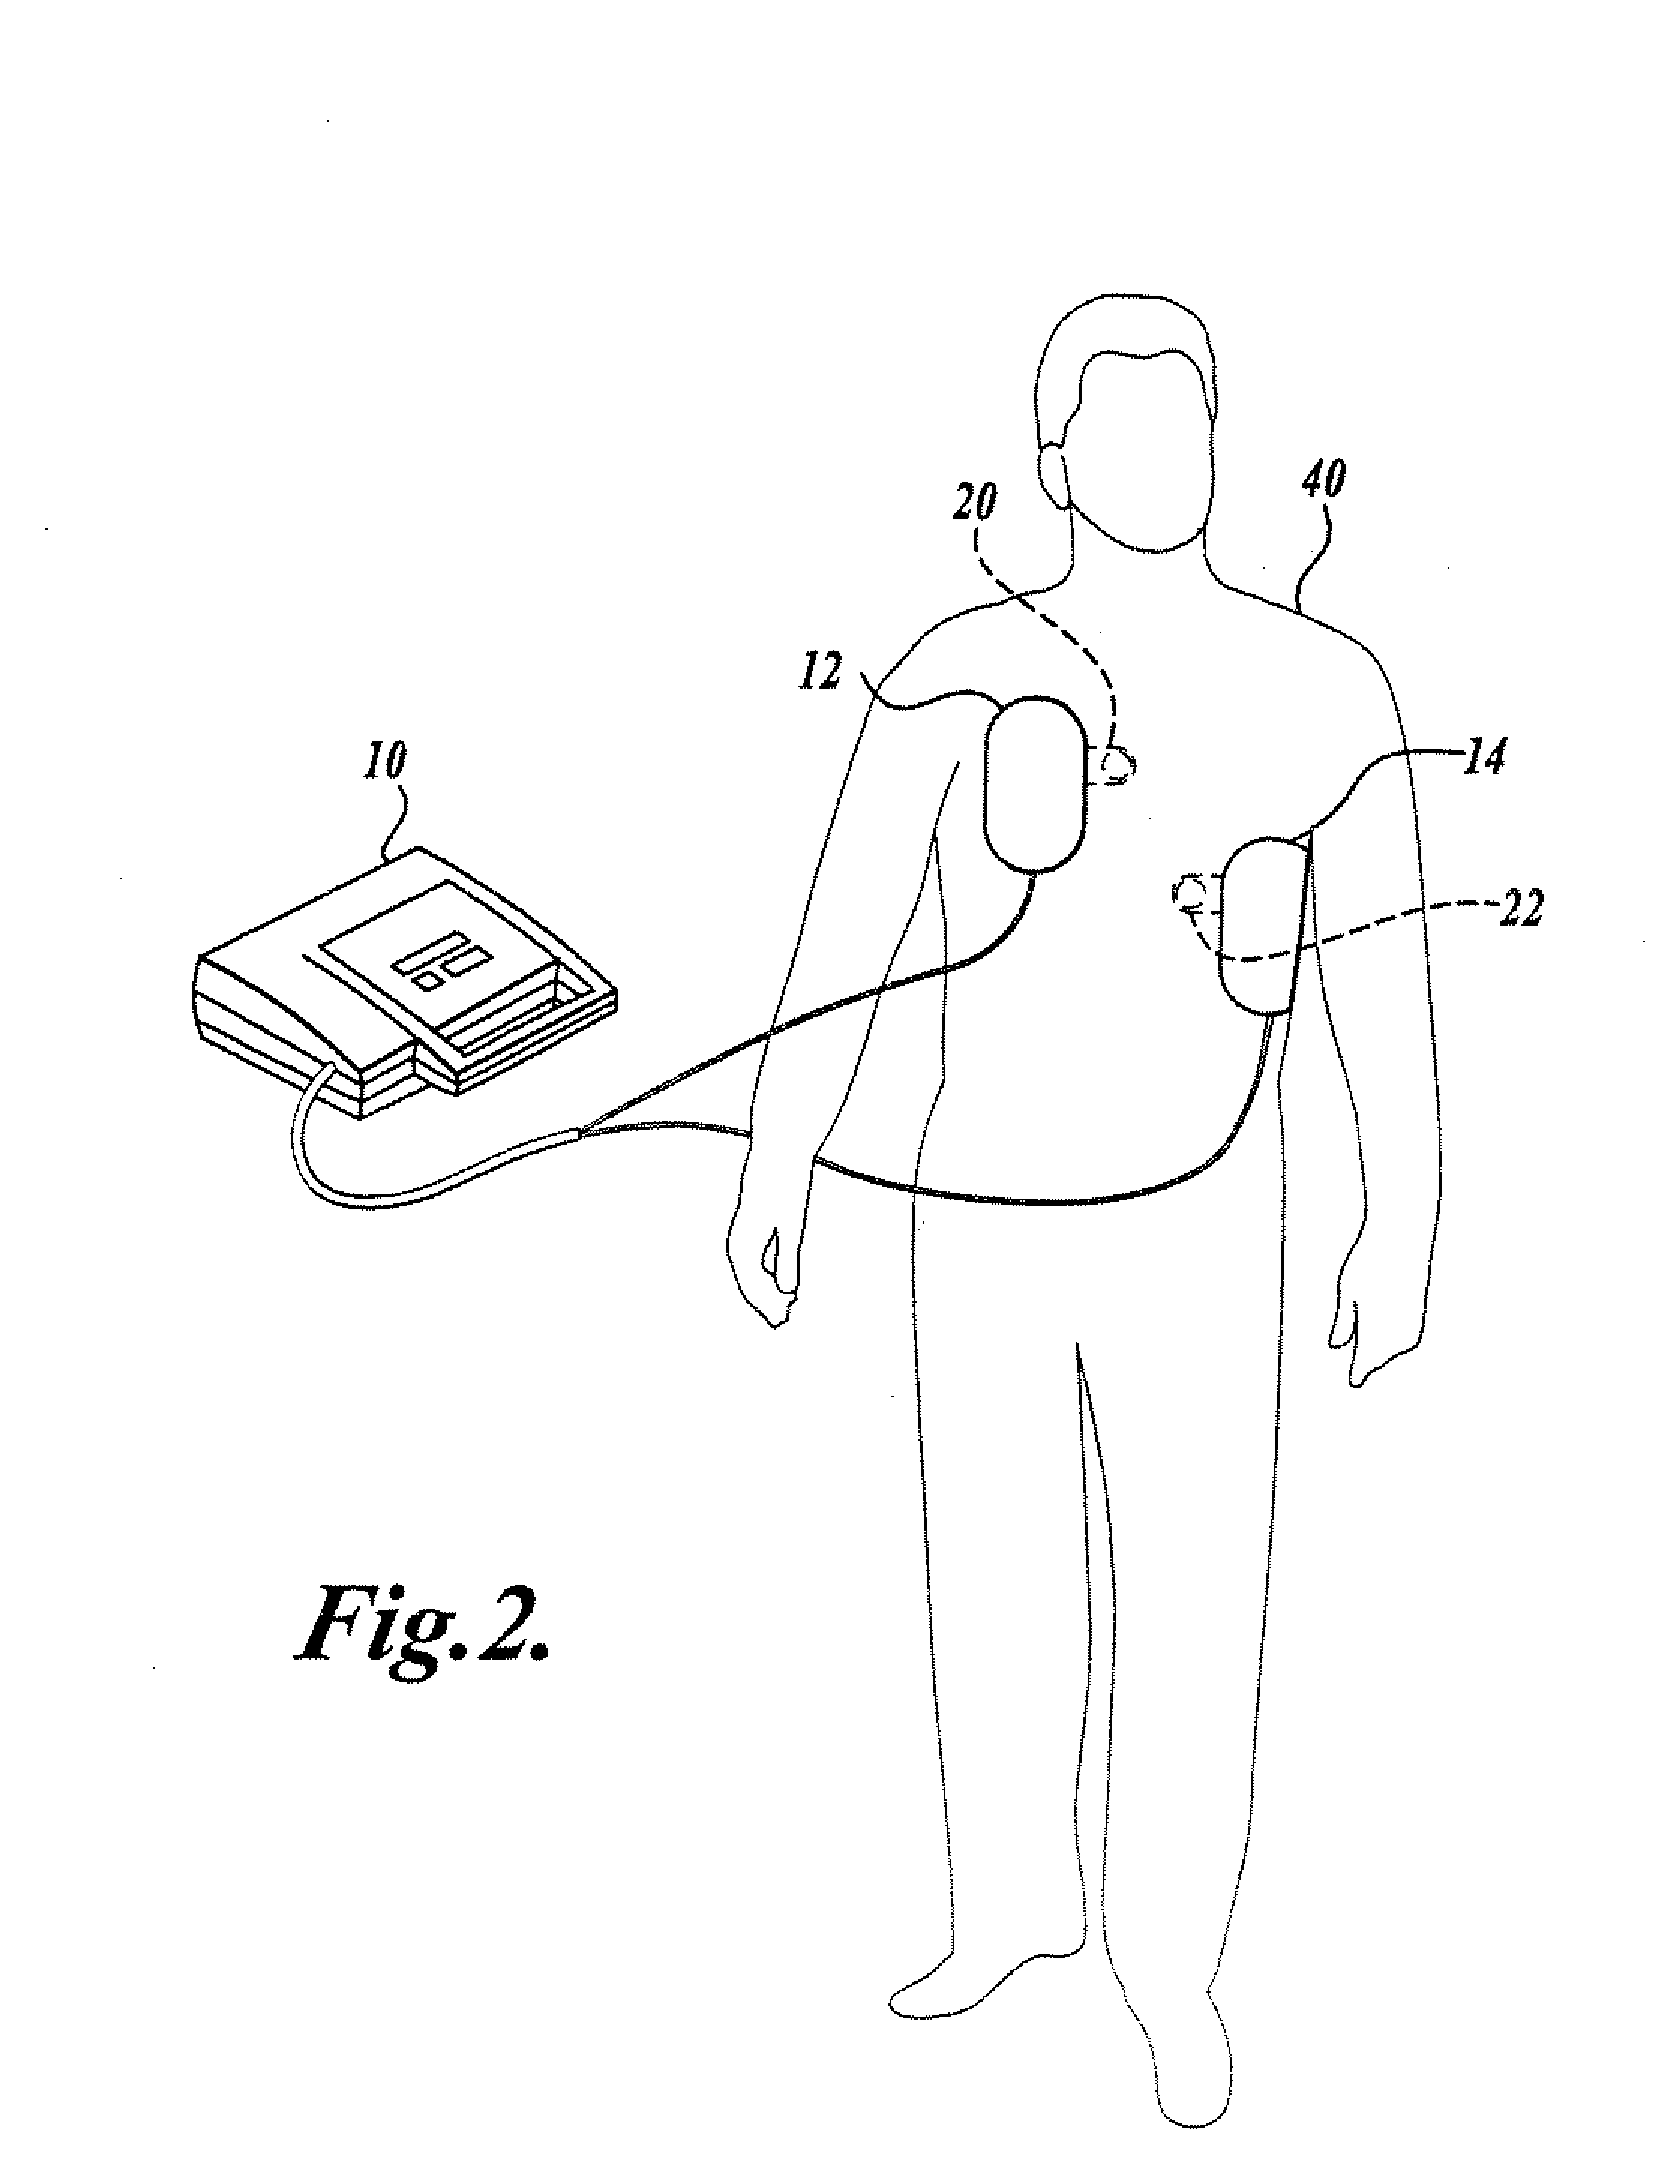 Pulse Detection Method and Apparatus Using Patient Impedance